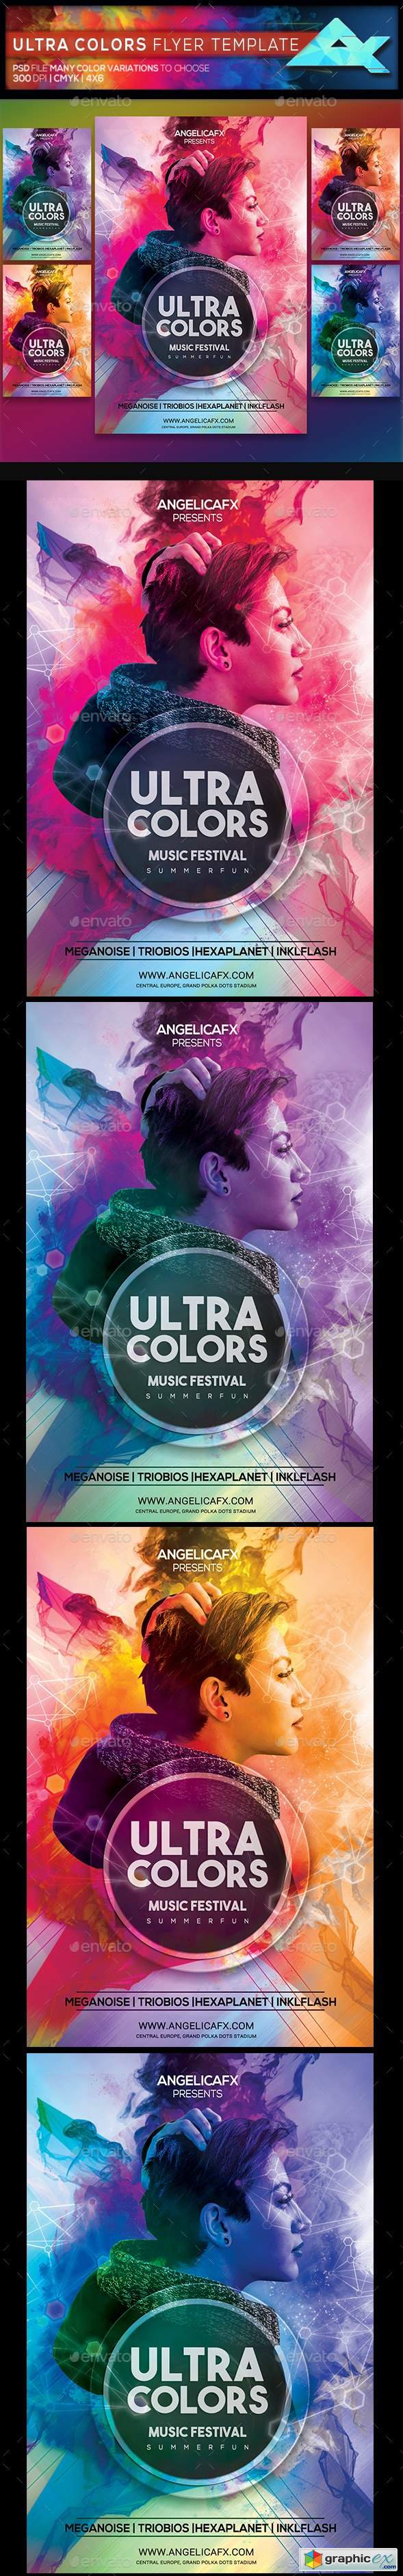 Ultra Colors Photoshop Flyer Template